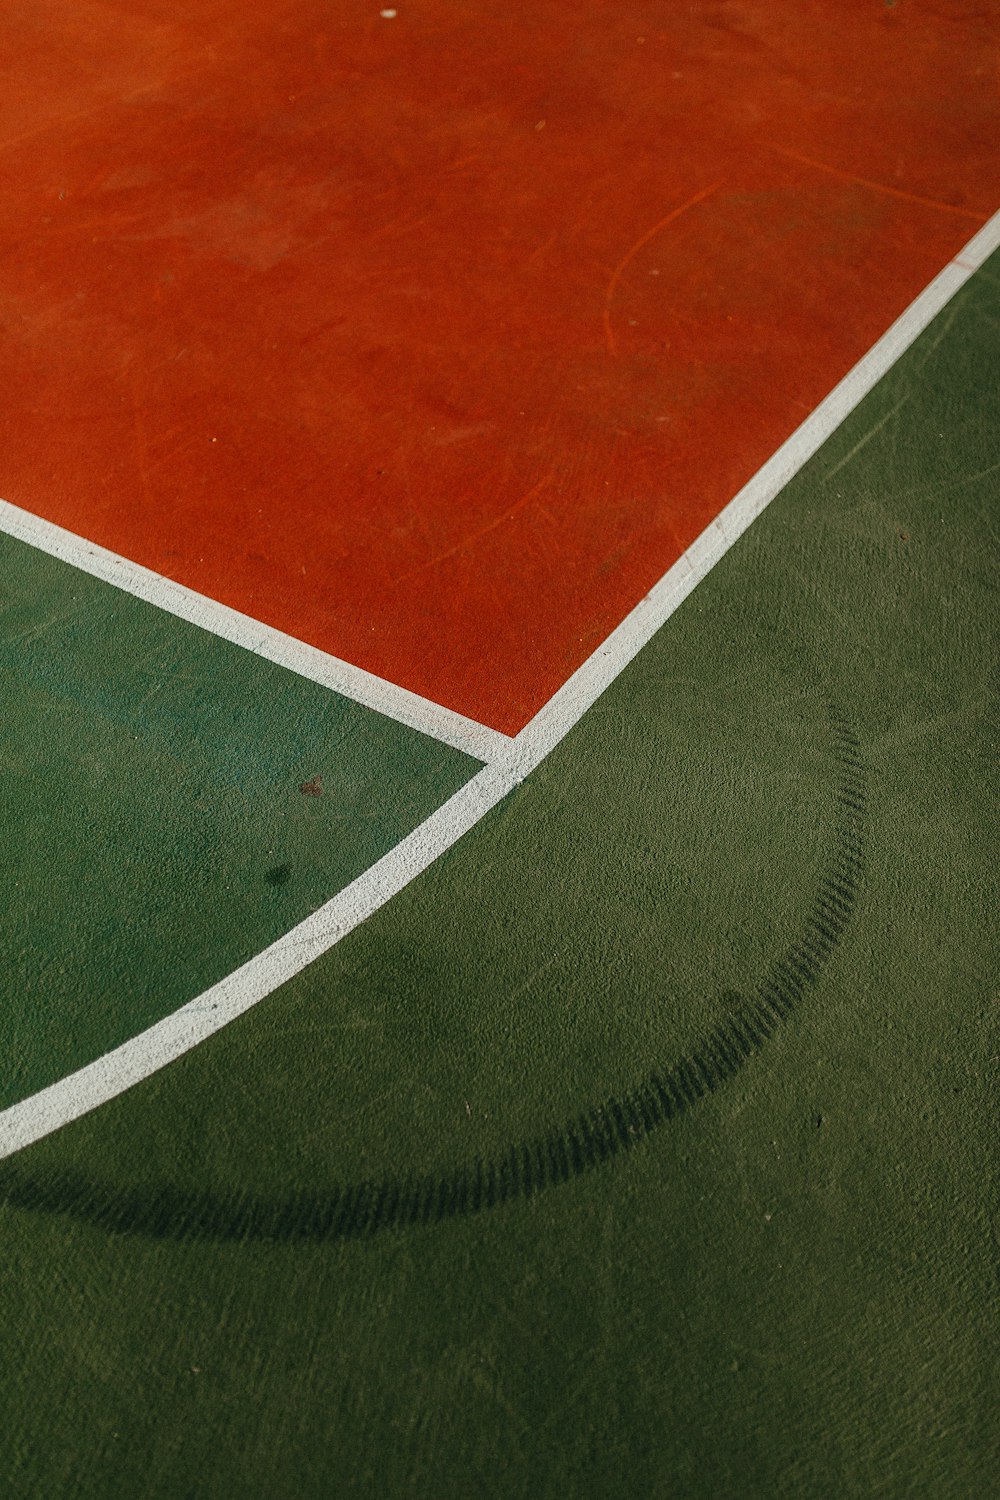 a tennis court with a red and green court